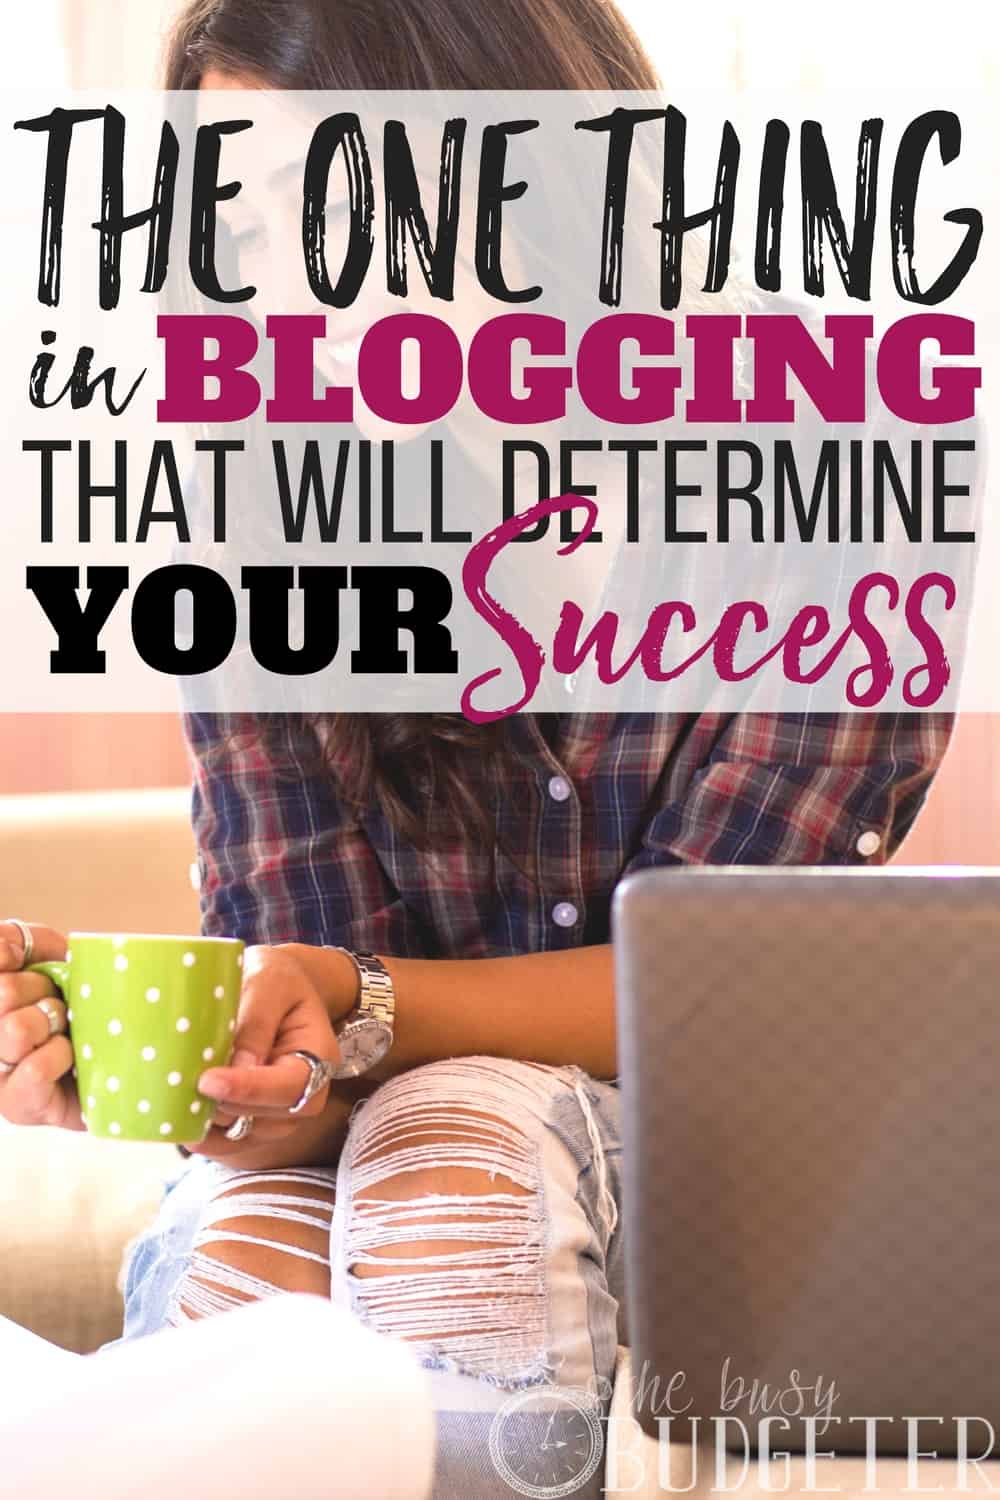 I never knew that this was the secret to blogging success but after I did it, WOW! Not only business and blogging game changer but also a life changer. I can't believe the motivation and push this gave me to step up my blogging game. Not only am I actually making money from blogging now but I'm also turning my blog into a business!